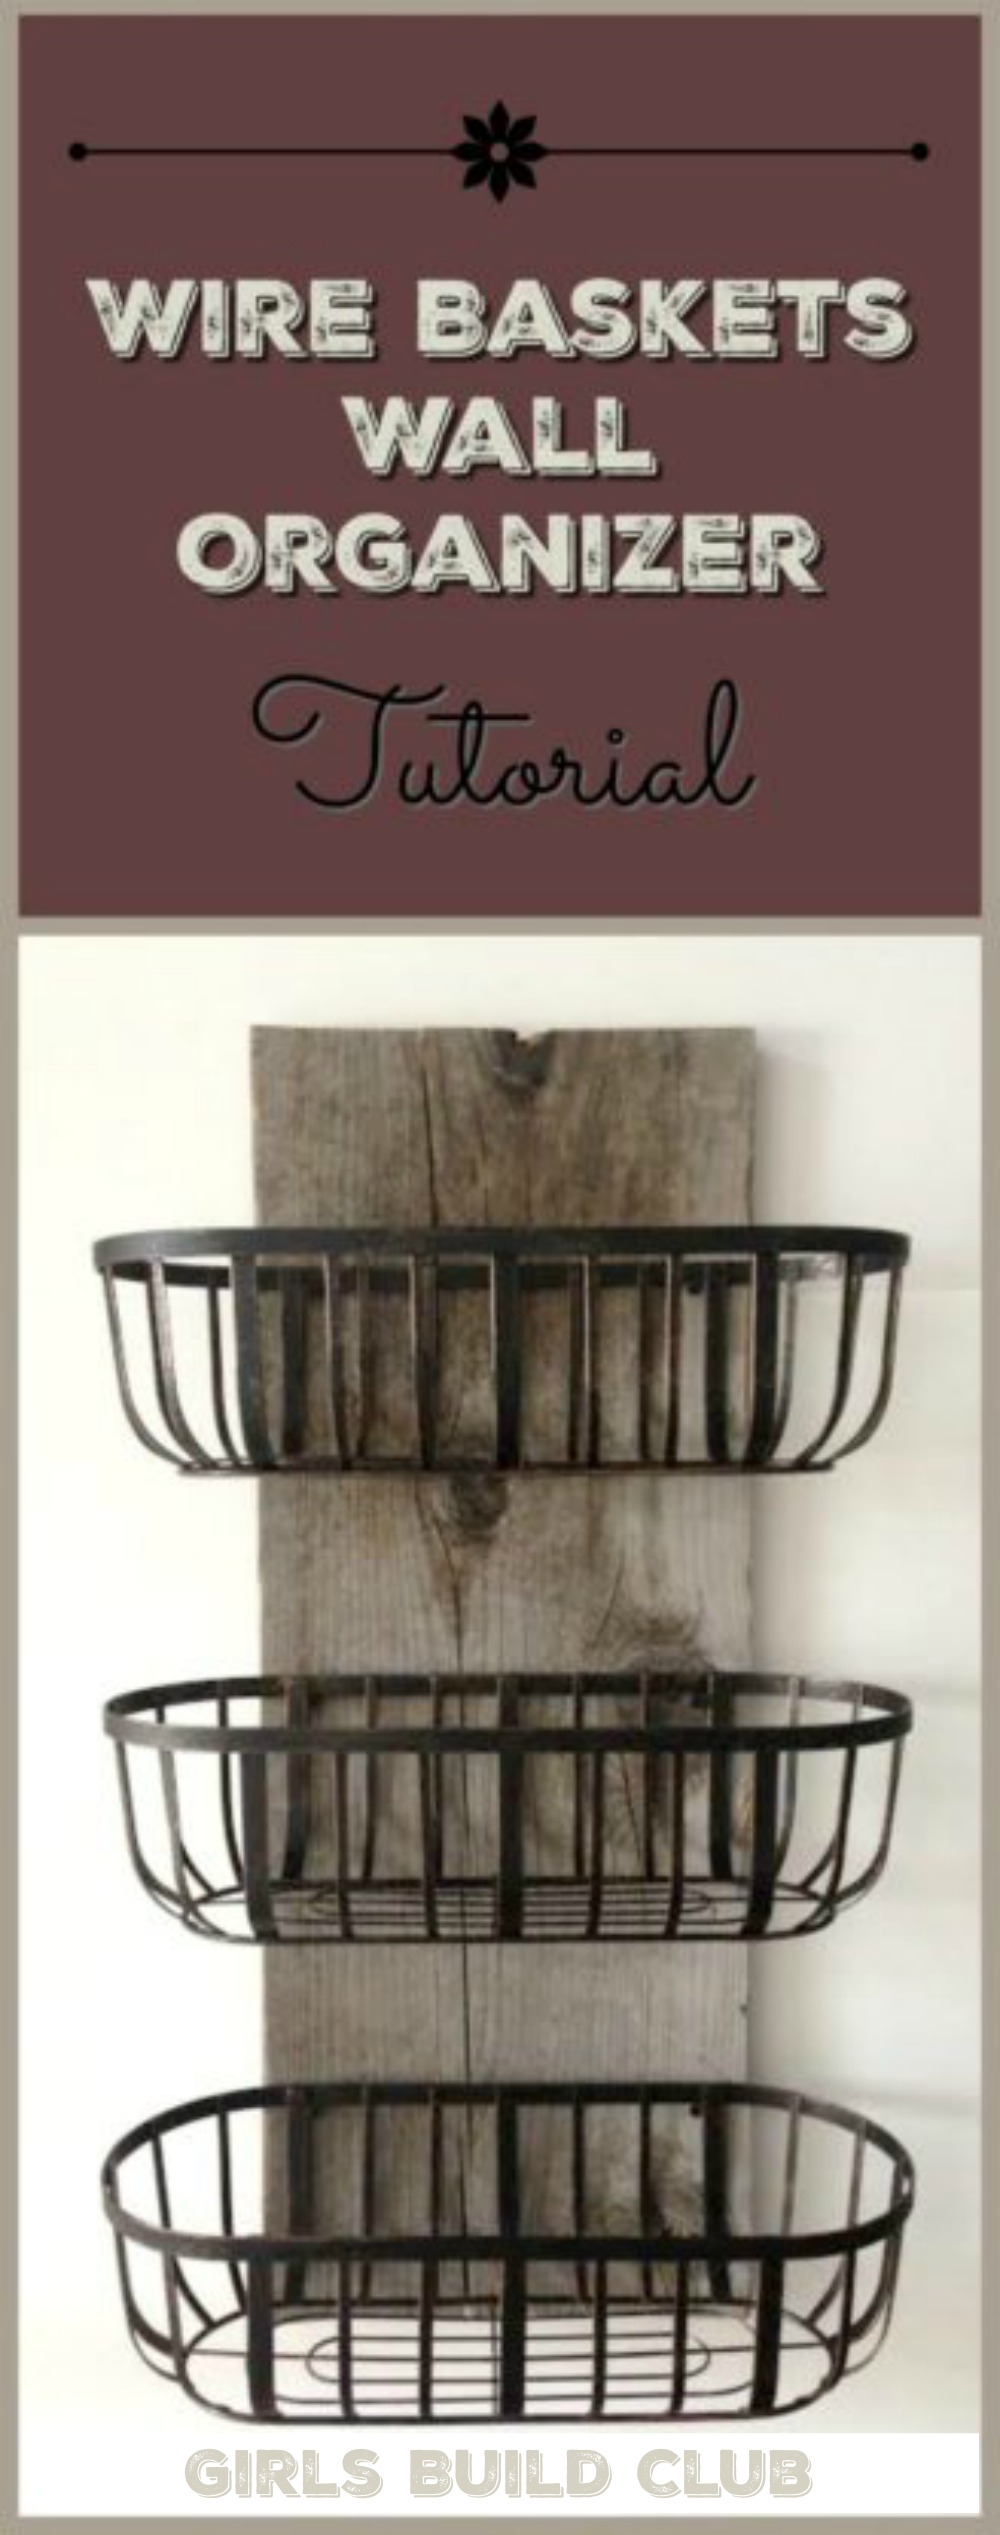 Rustic wood and wire baskets organizer. I made this for our kitchen and now it holds all our dishtowels and handtowels. Cheap and easy country farmhouse decor. Could also use in a farmhouse or rustic style bathroom.